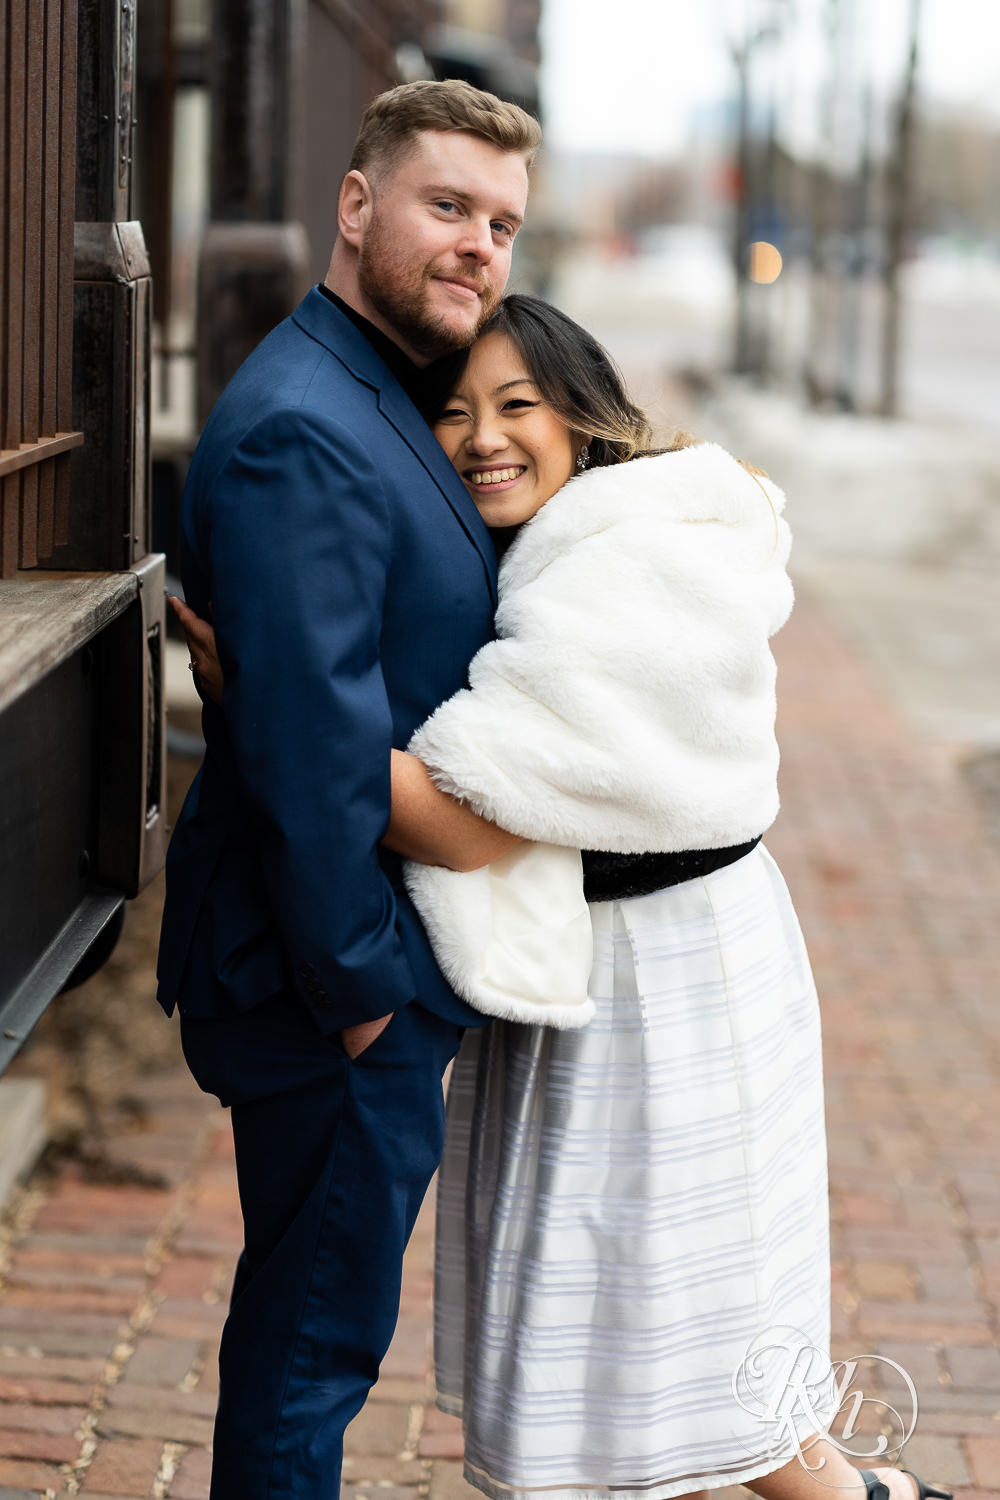 Man and Hmong woman snuggle in Saint Anthony Main in Minneapolis, Minnesota.